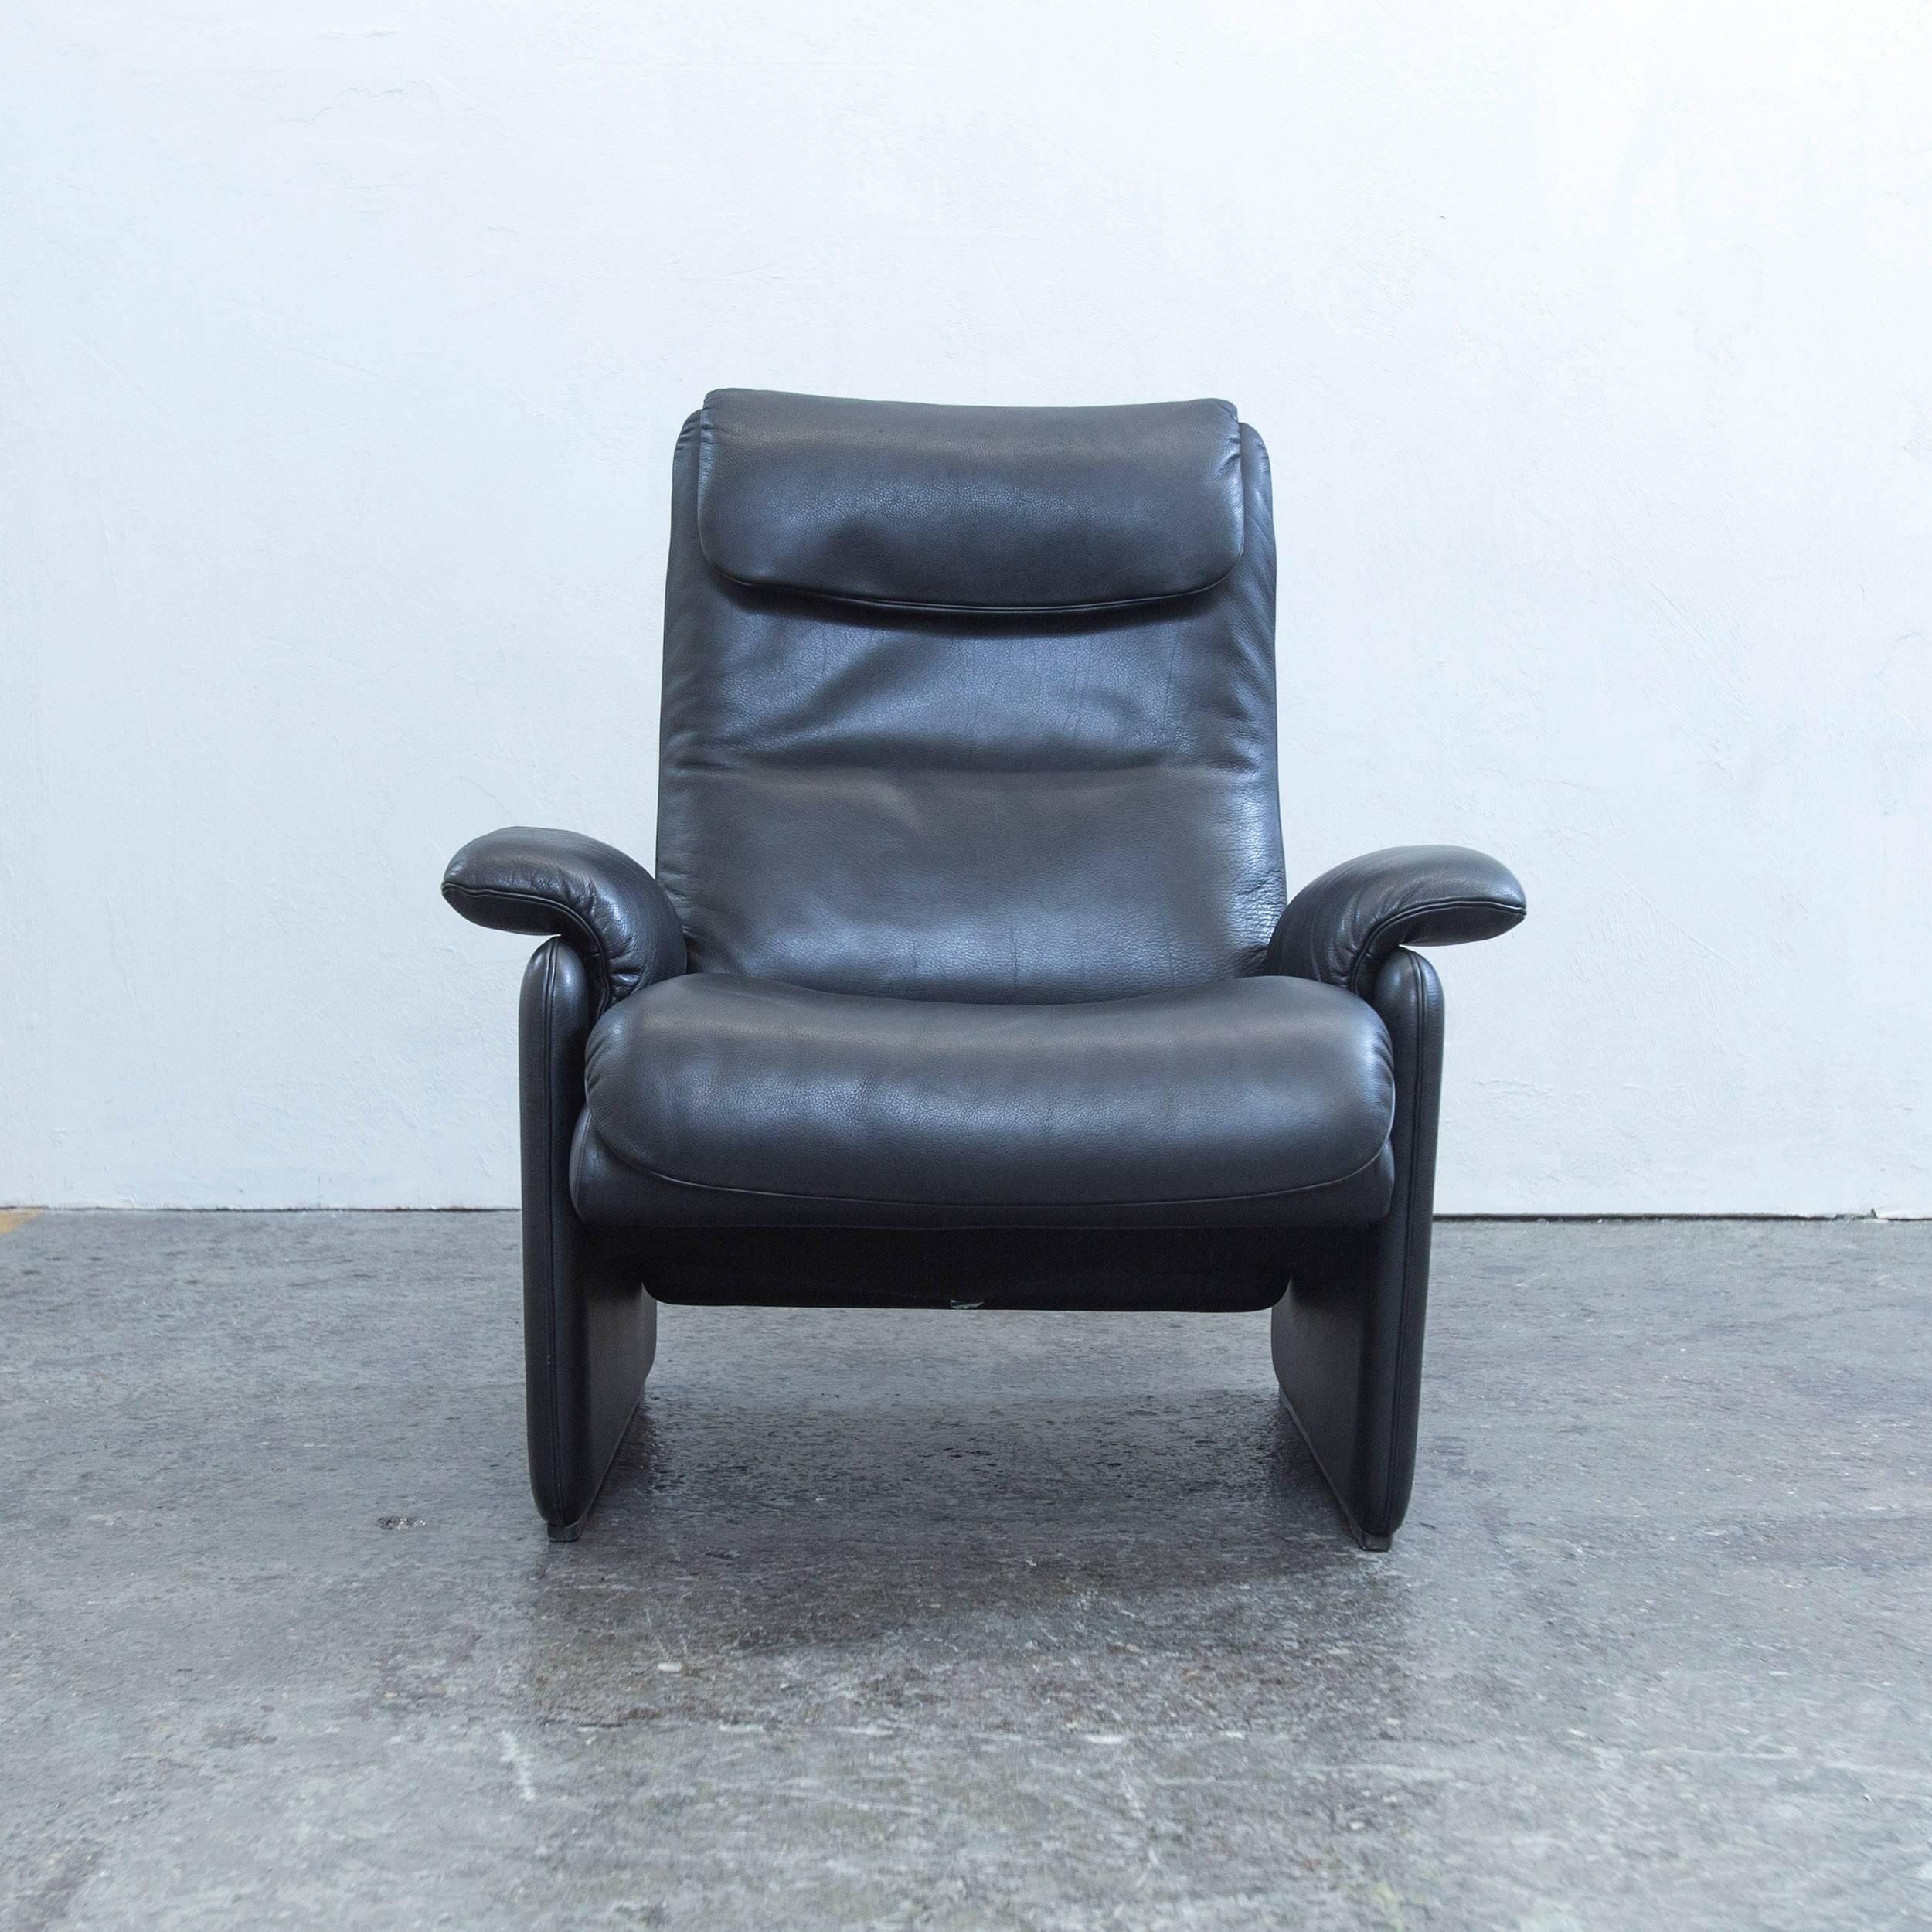 Black colored original De Sede designer leather armchair in a minimalistic and modern design, with a convenient function, made for pure comfort and flexibility.